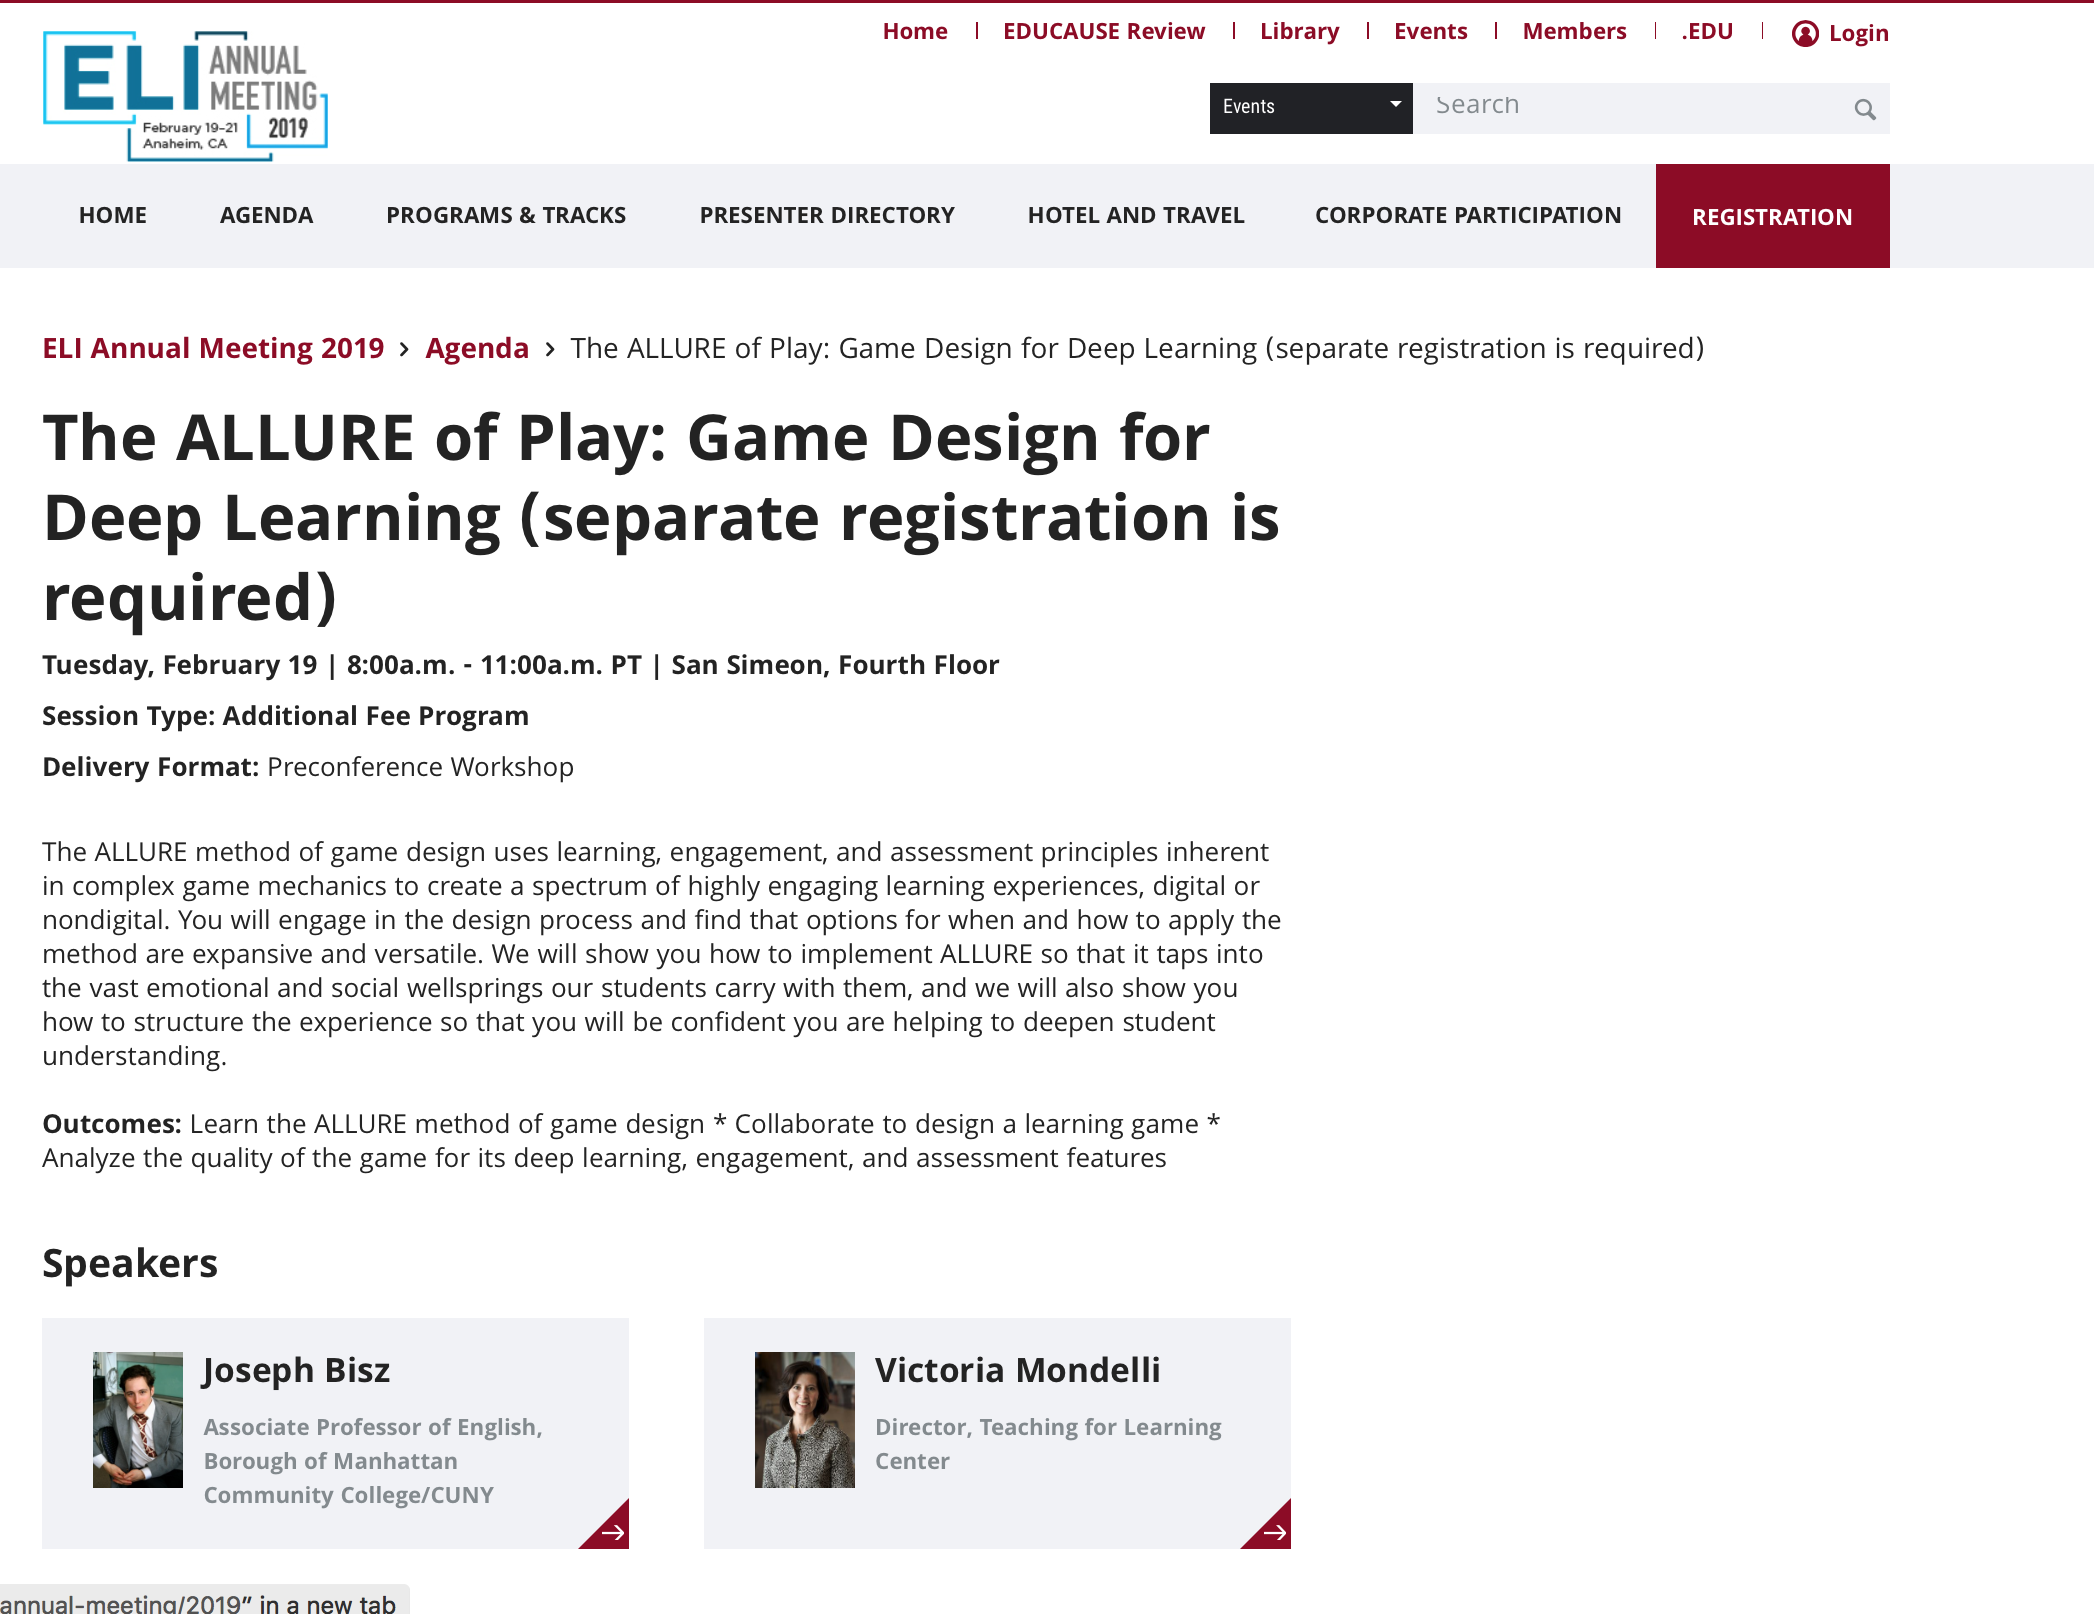 The Allure of Play – Joe Bisz and Game-Based Learning